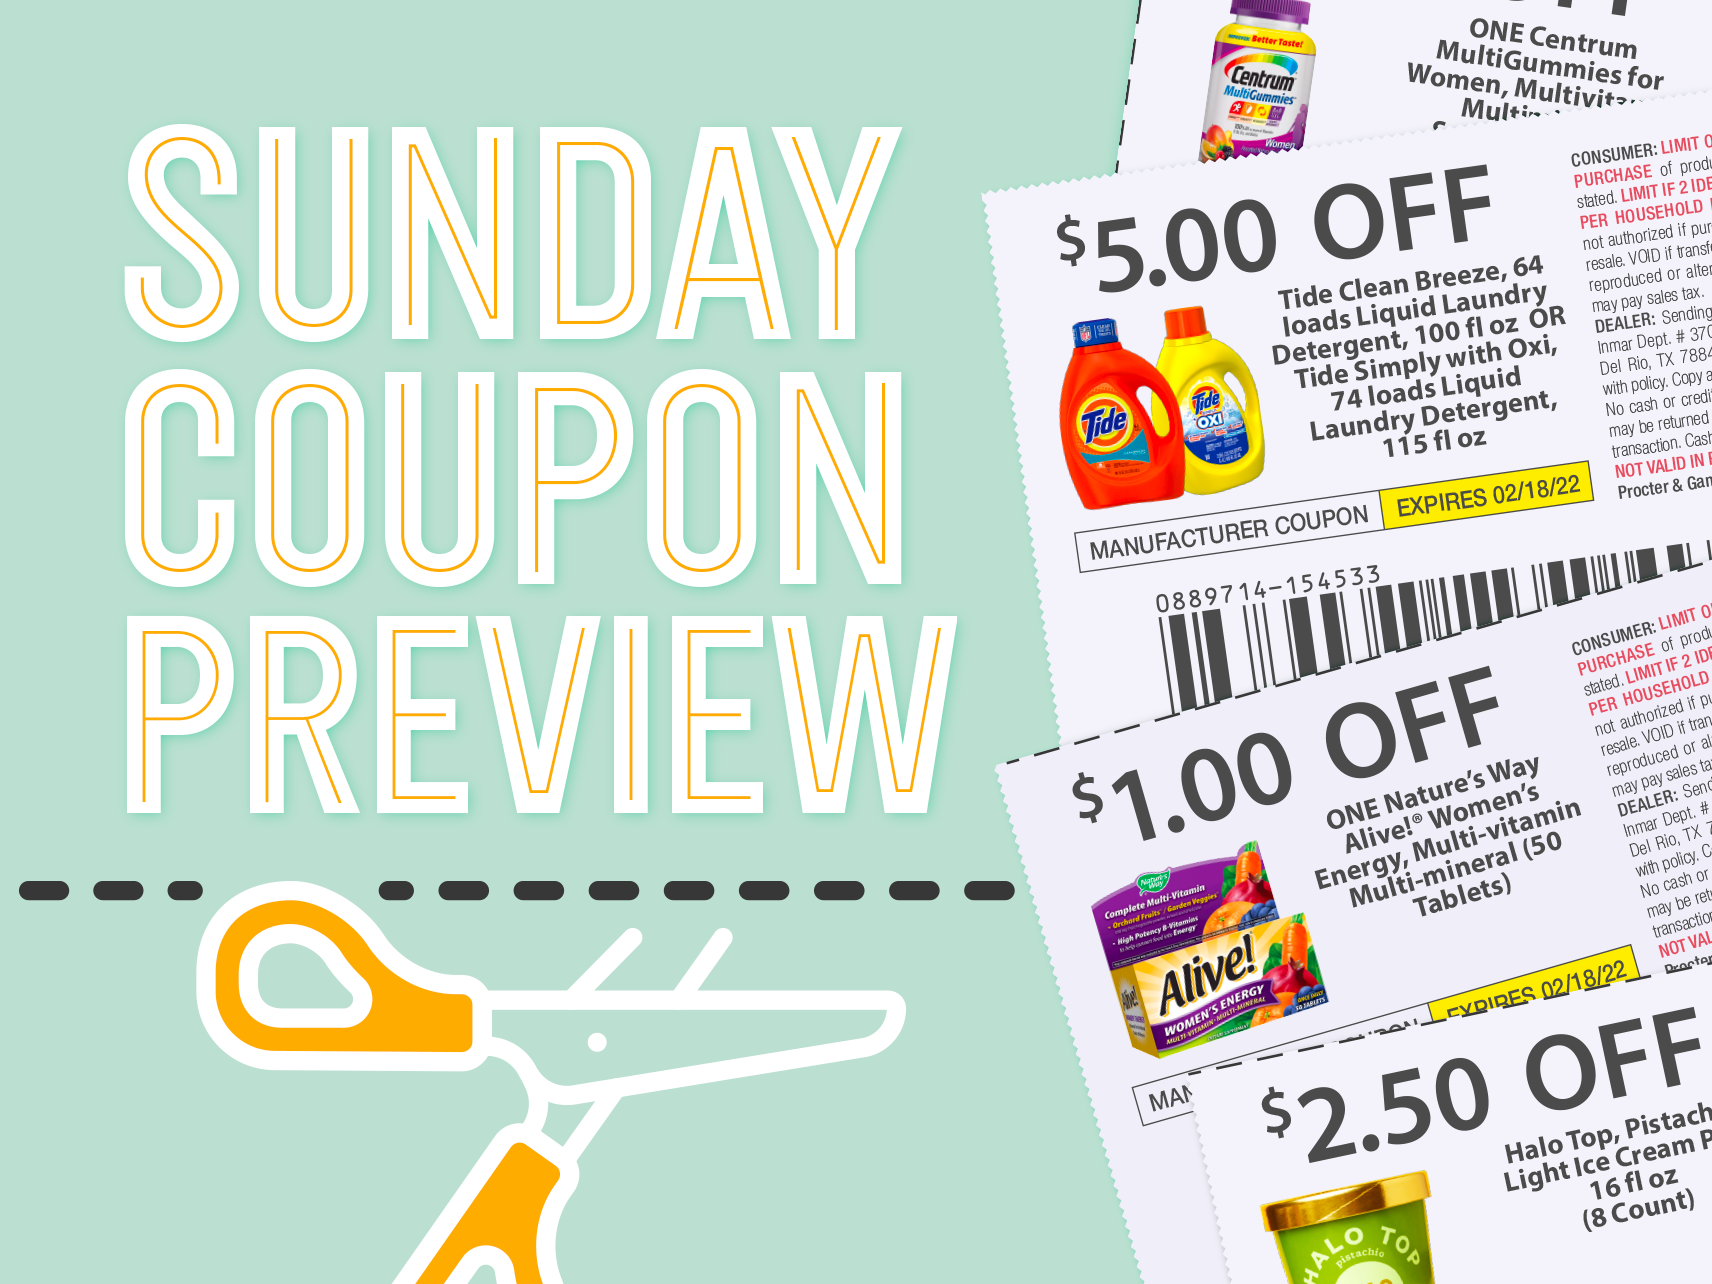 Sunday Coupon Preview For 9/24 – Two Inserts